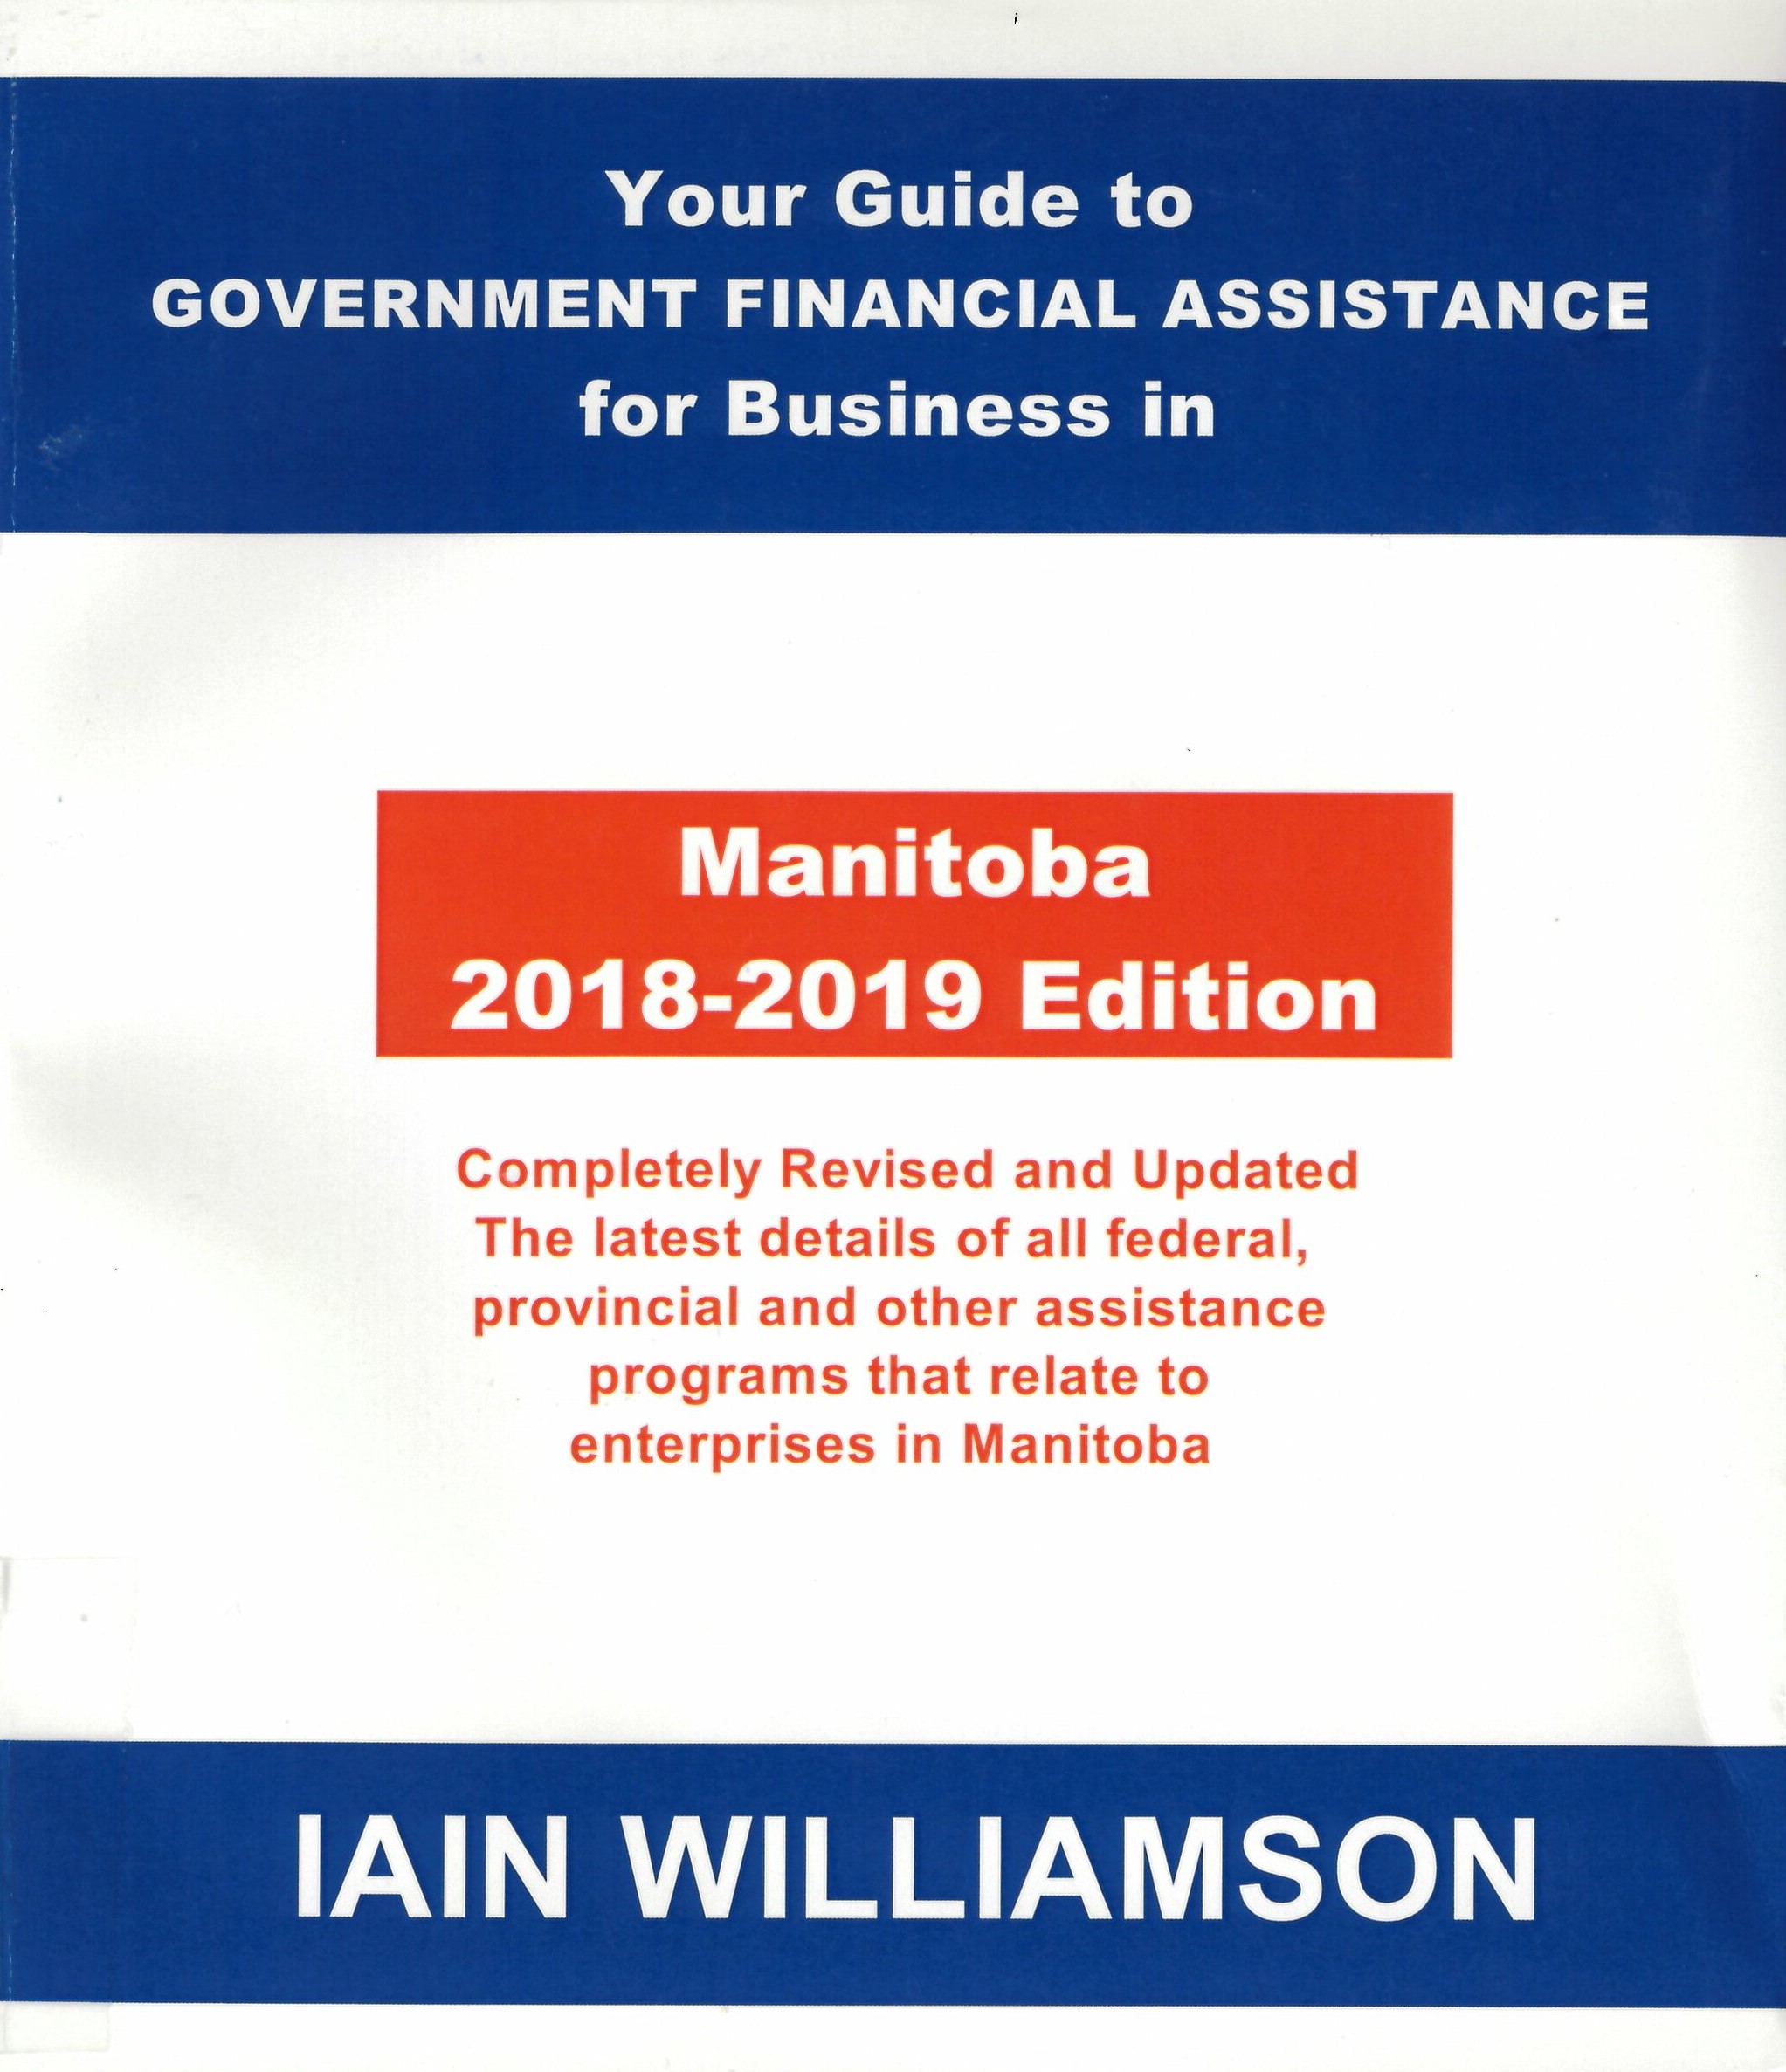 Your guide to government financial assistance for business in Manitoba  : the latest details of all federal, provincial and other assistance programs that relate to enterprises in Manitoba